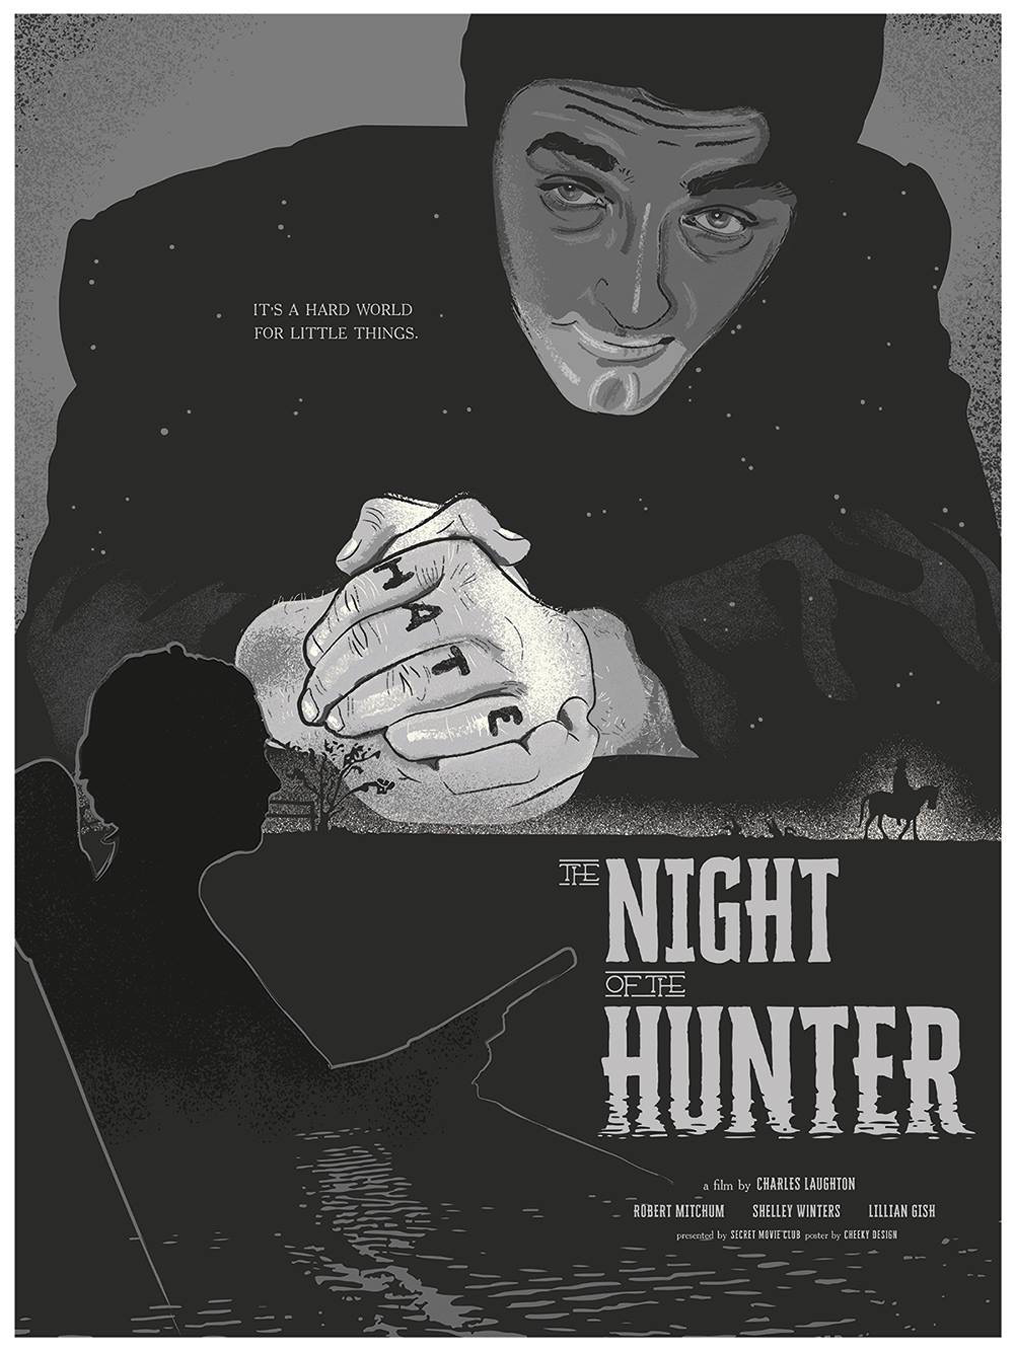 Night of the Hunter movie poster featuring an illustrated Robert Mitchum leaning forward as well as the silhouette of granny in her rocker wielding a shotgun. Iconic. 